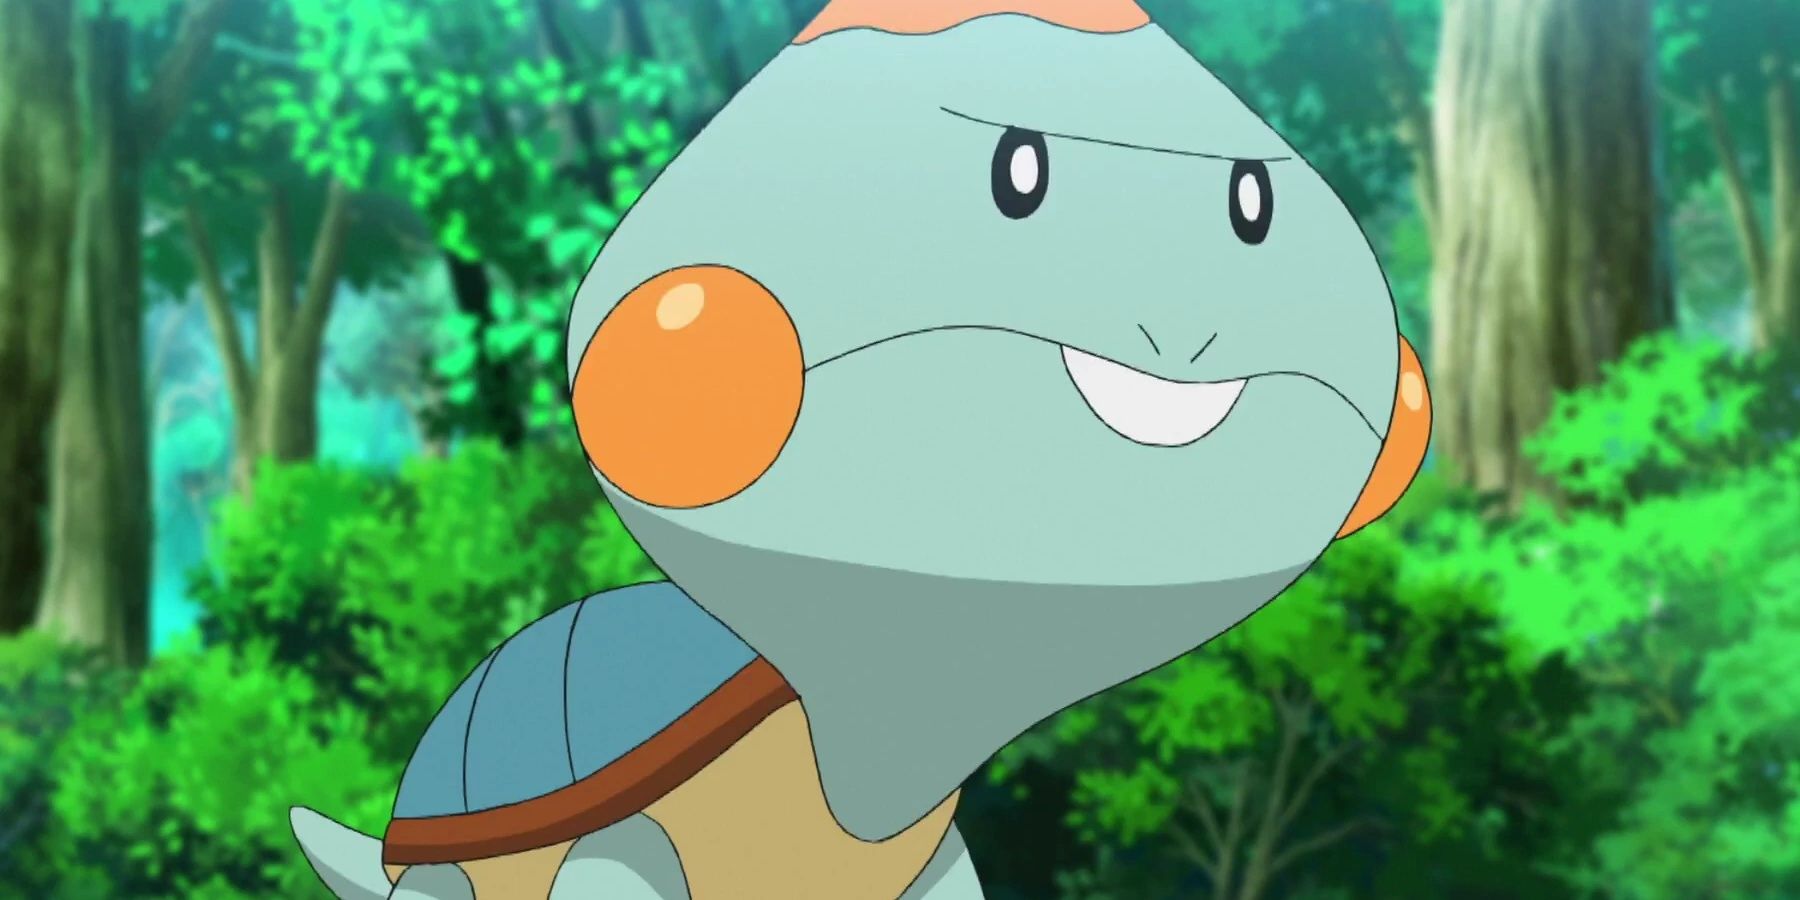 A screenshot of Chewtle from the Pokemon anime.